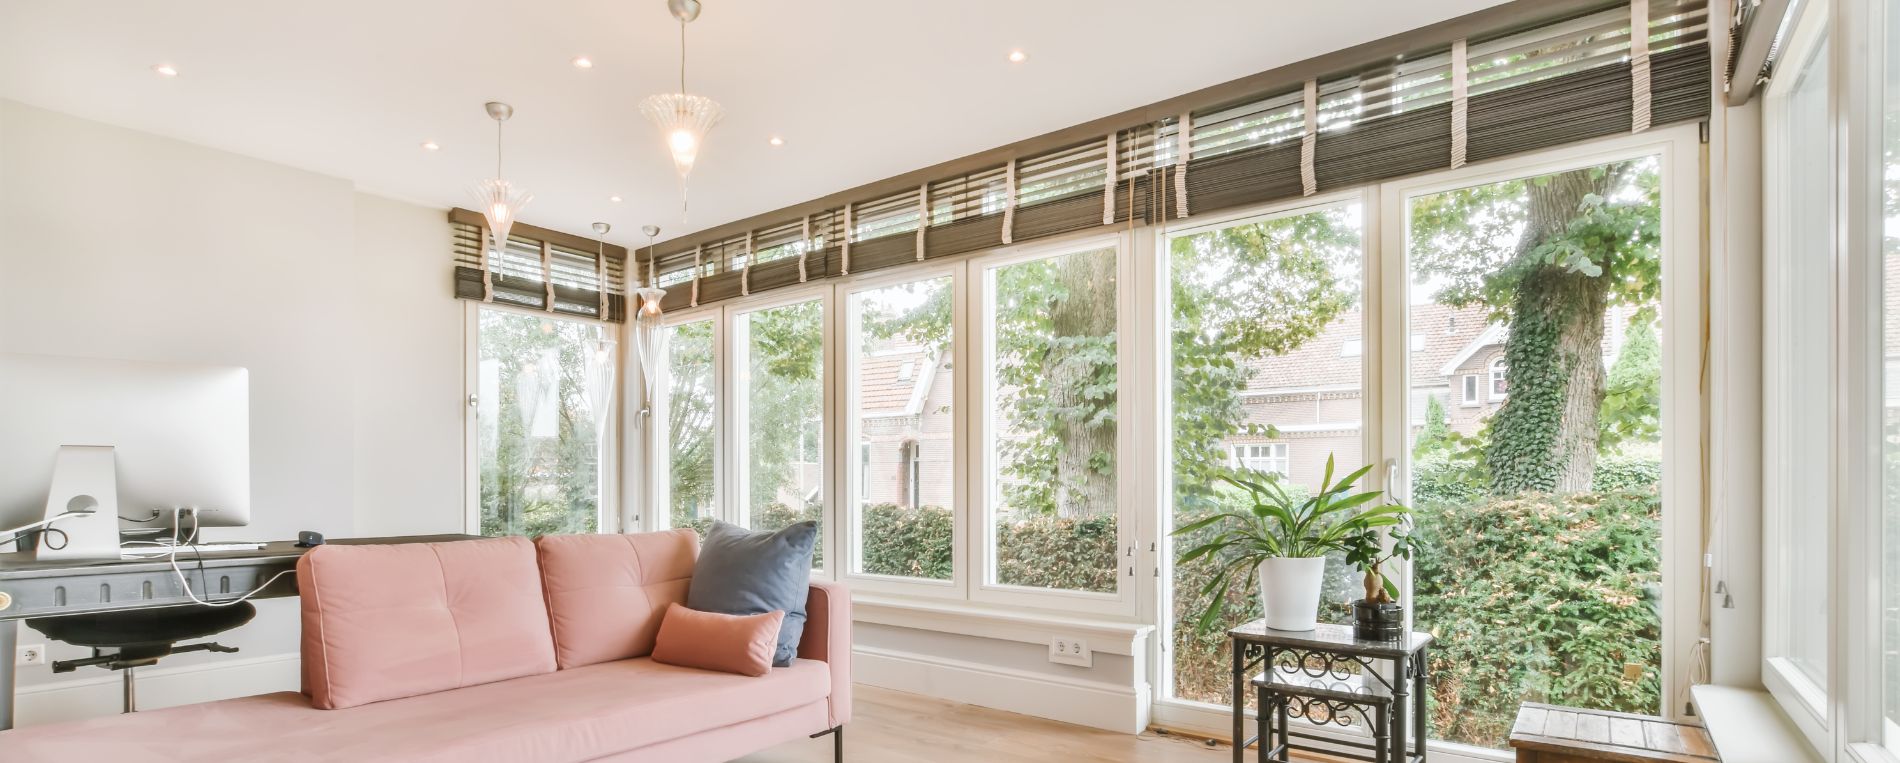 Wi-Fi Motorized Shades For Mission Viejo Home